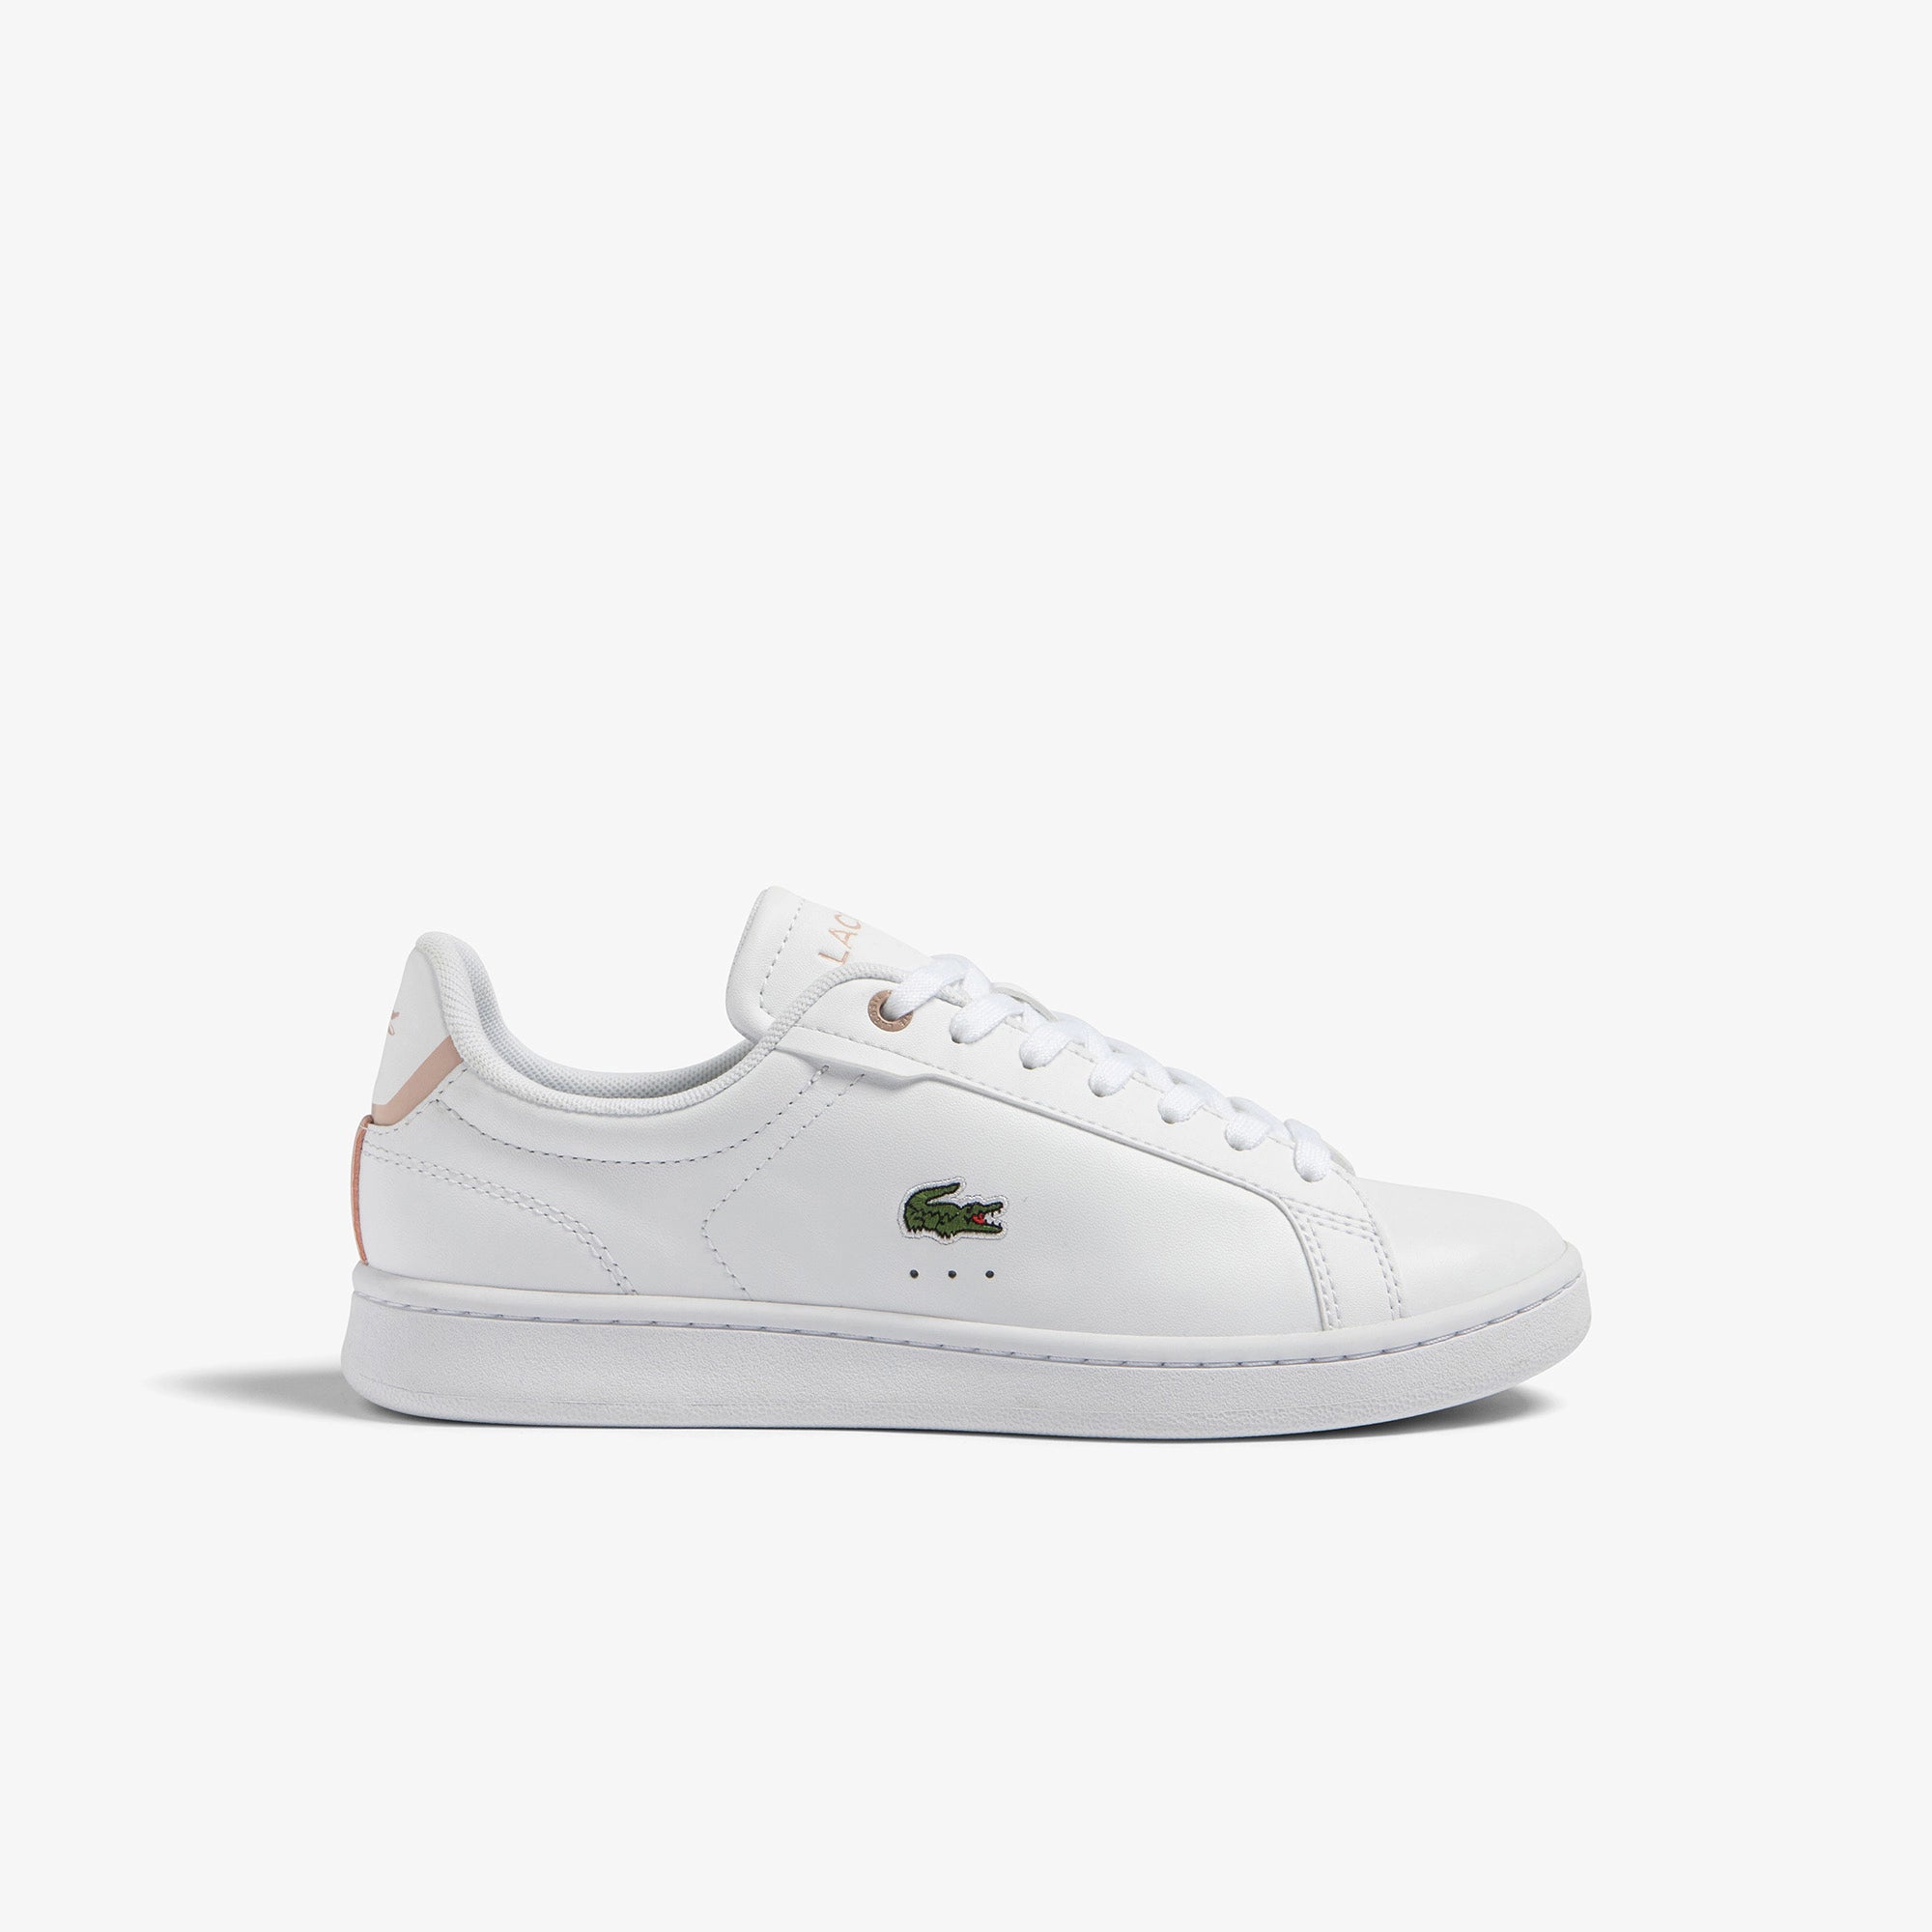 Women’s Carnaby Pro BL Tonal Leather Sneakers white/light pink